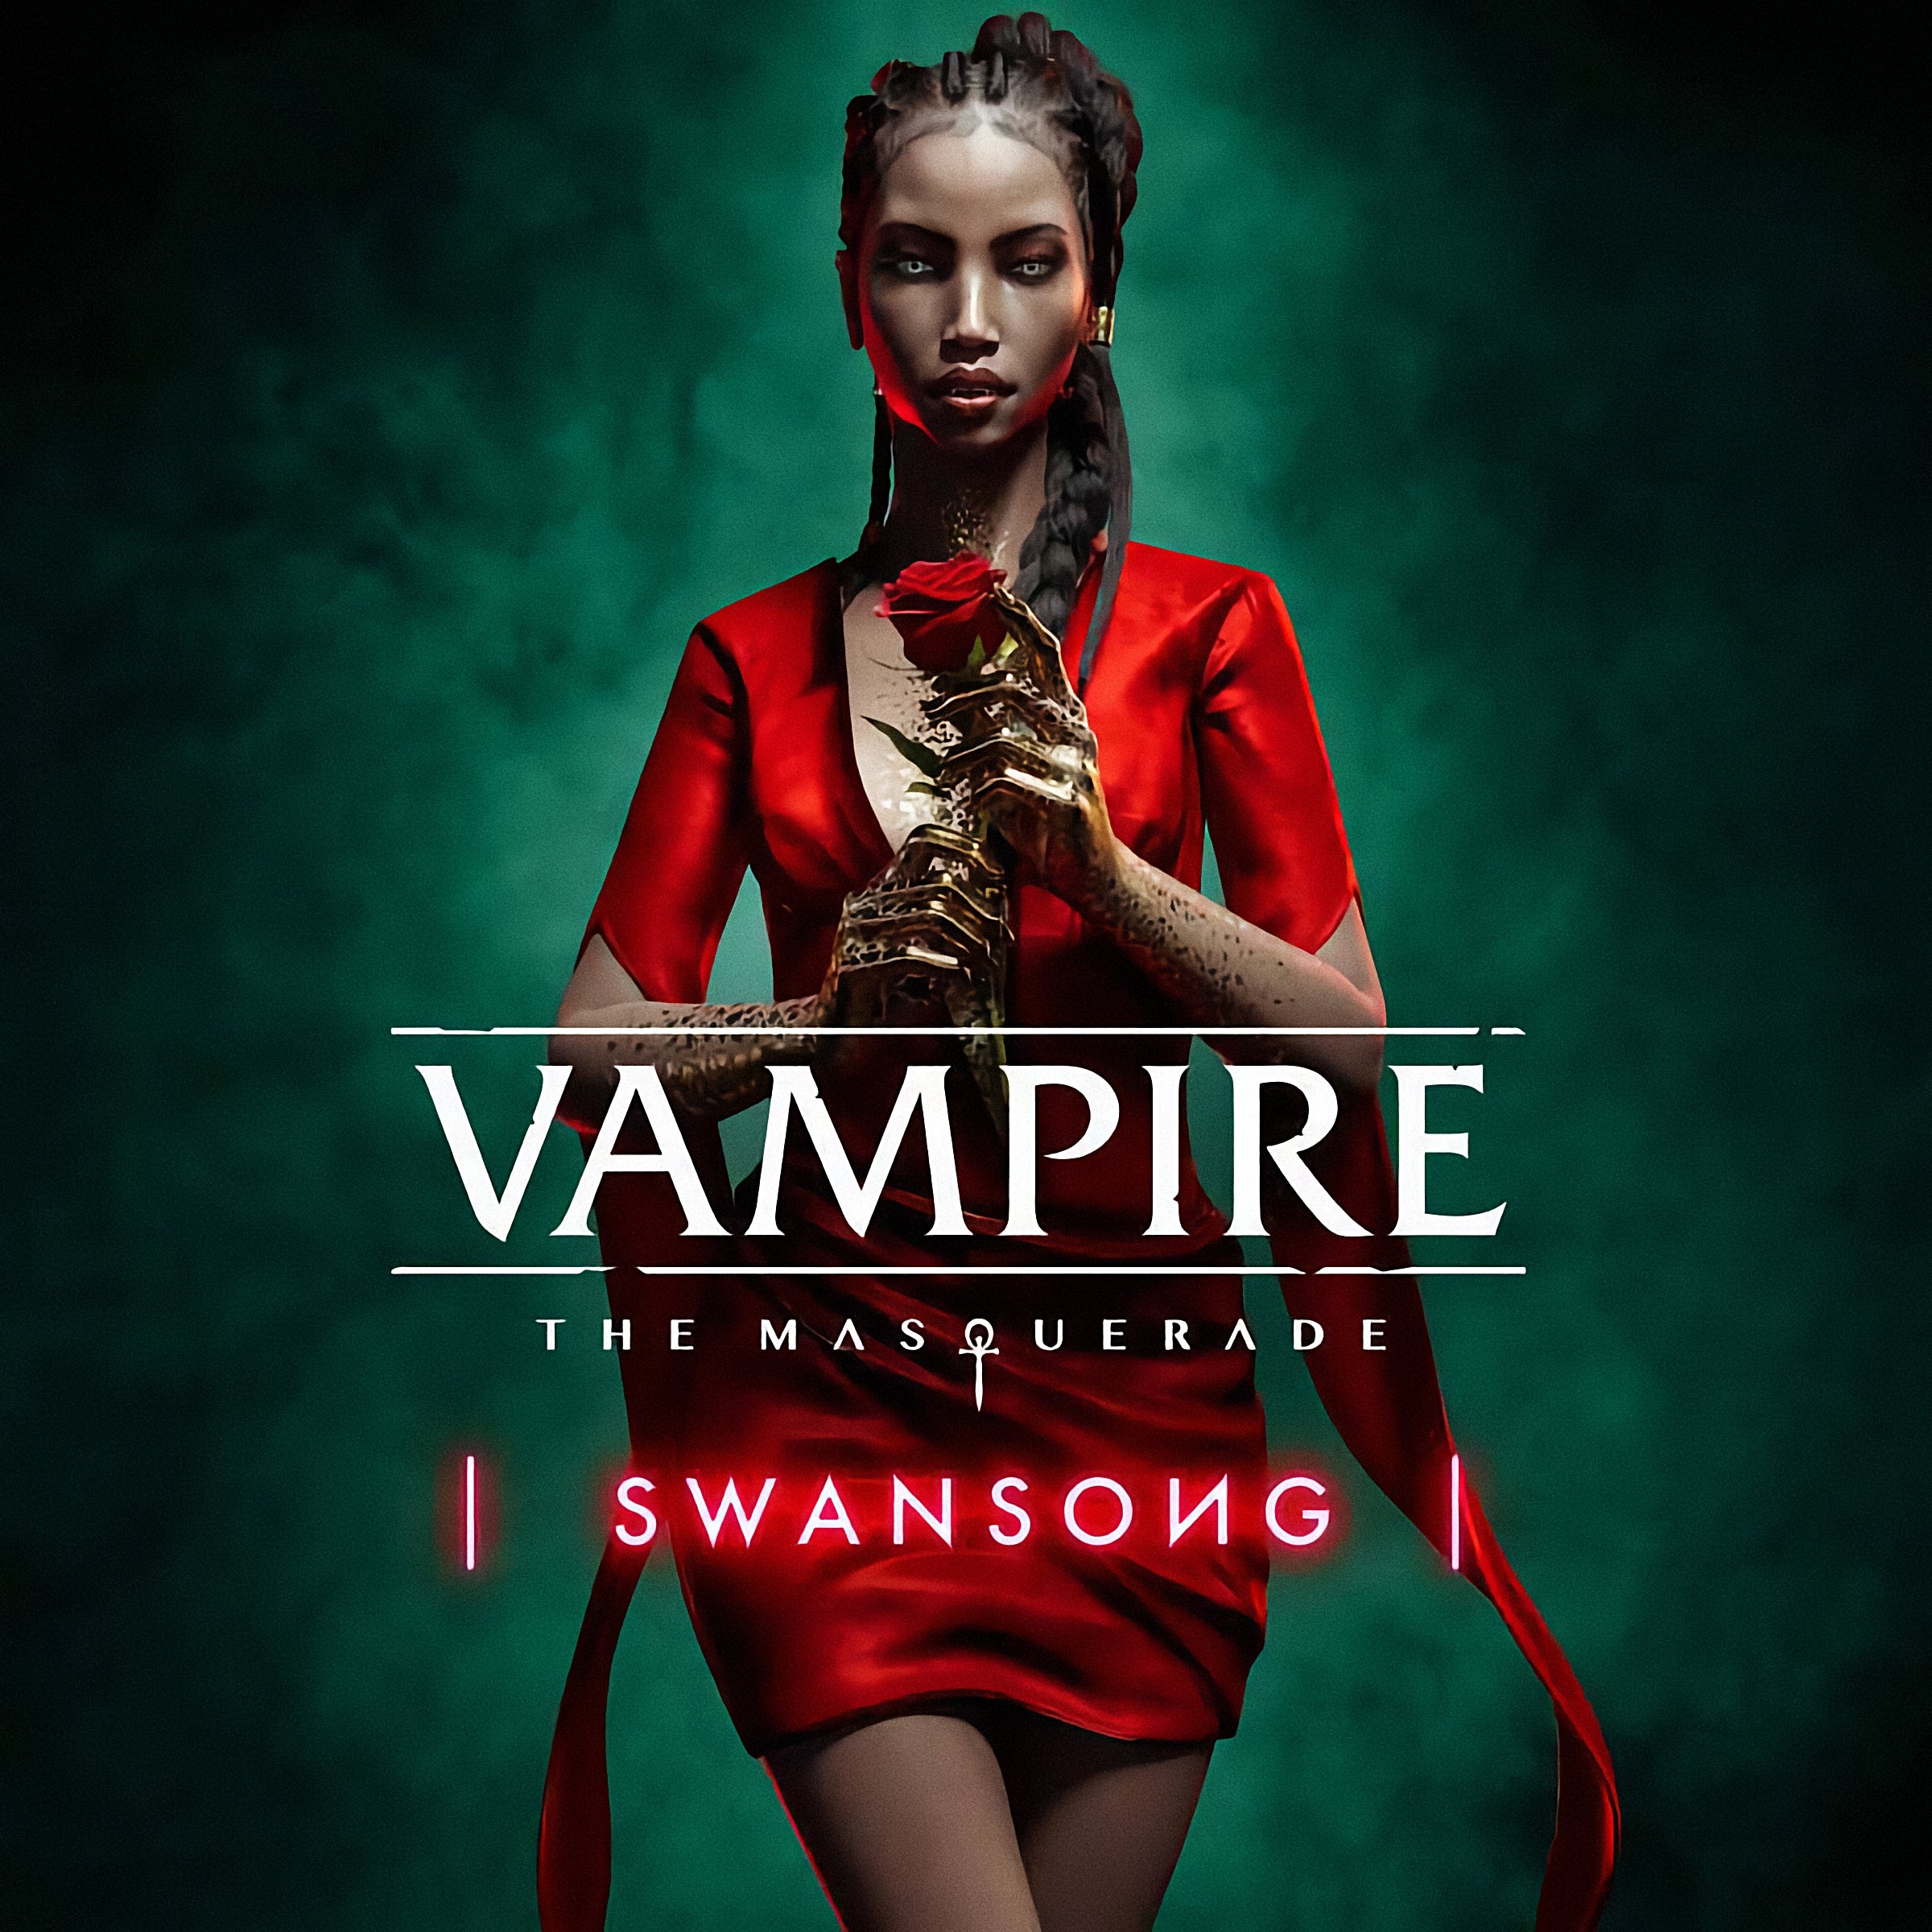 Vampire The Masquerade Swansong 2021 Game Wallpapers